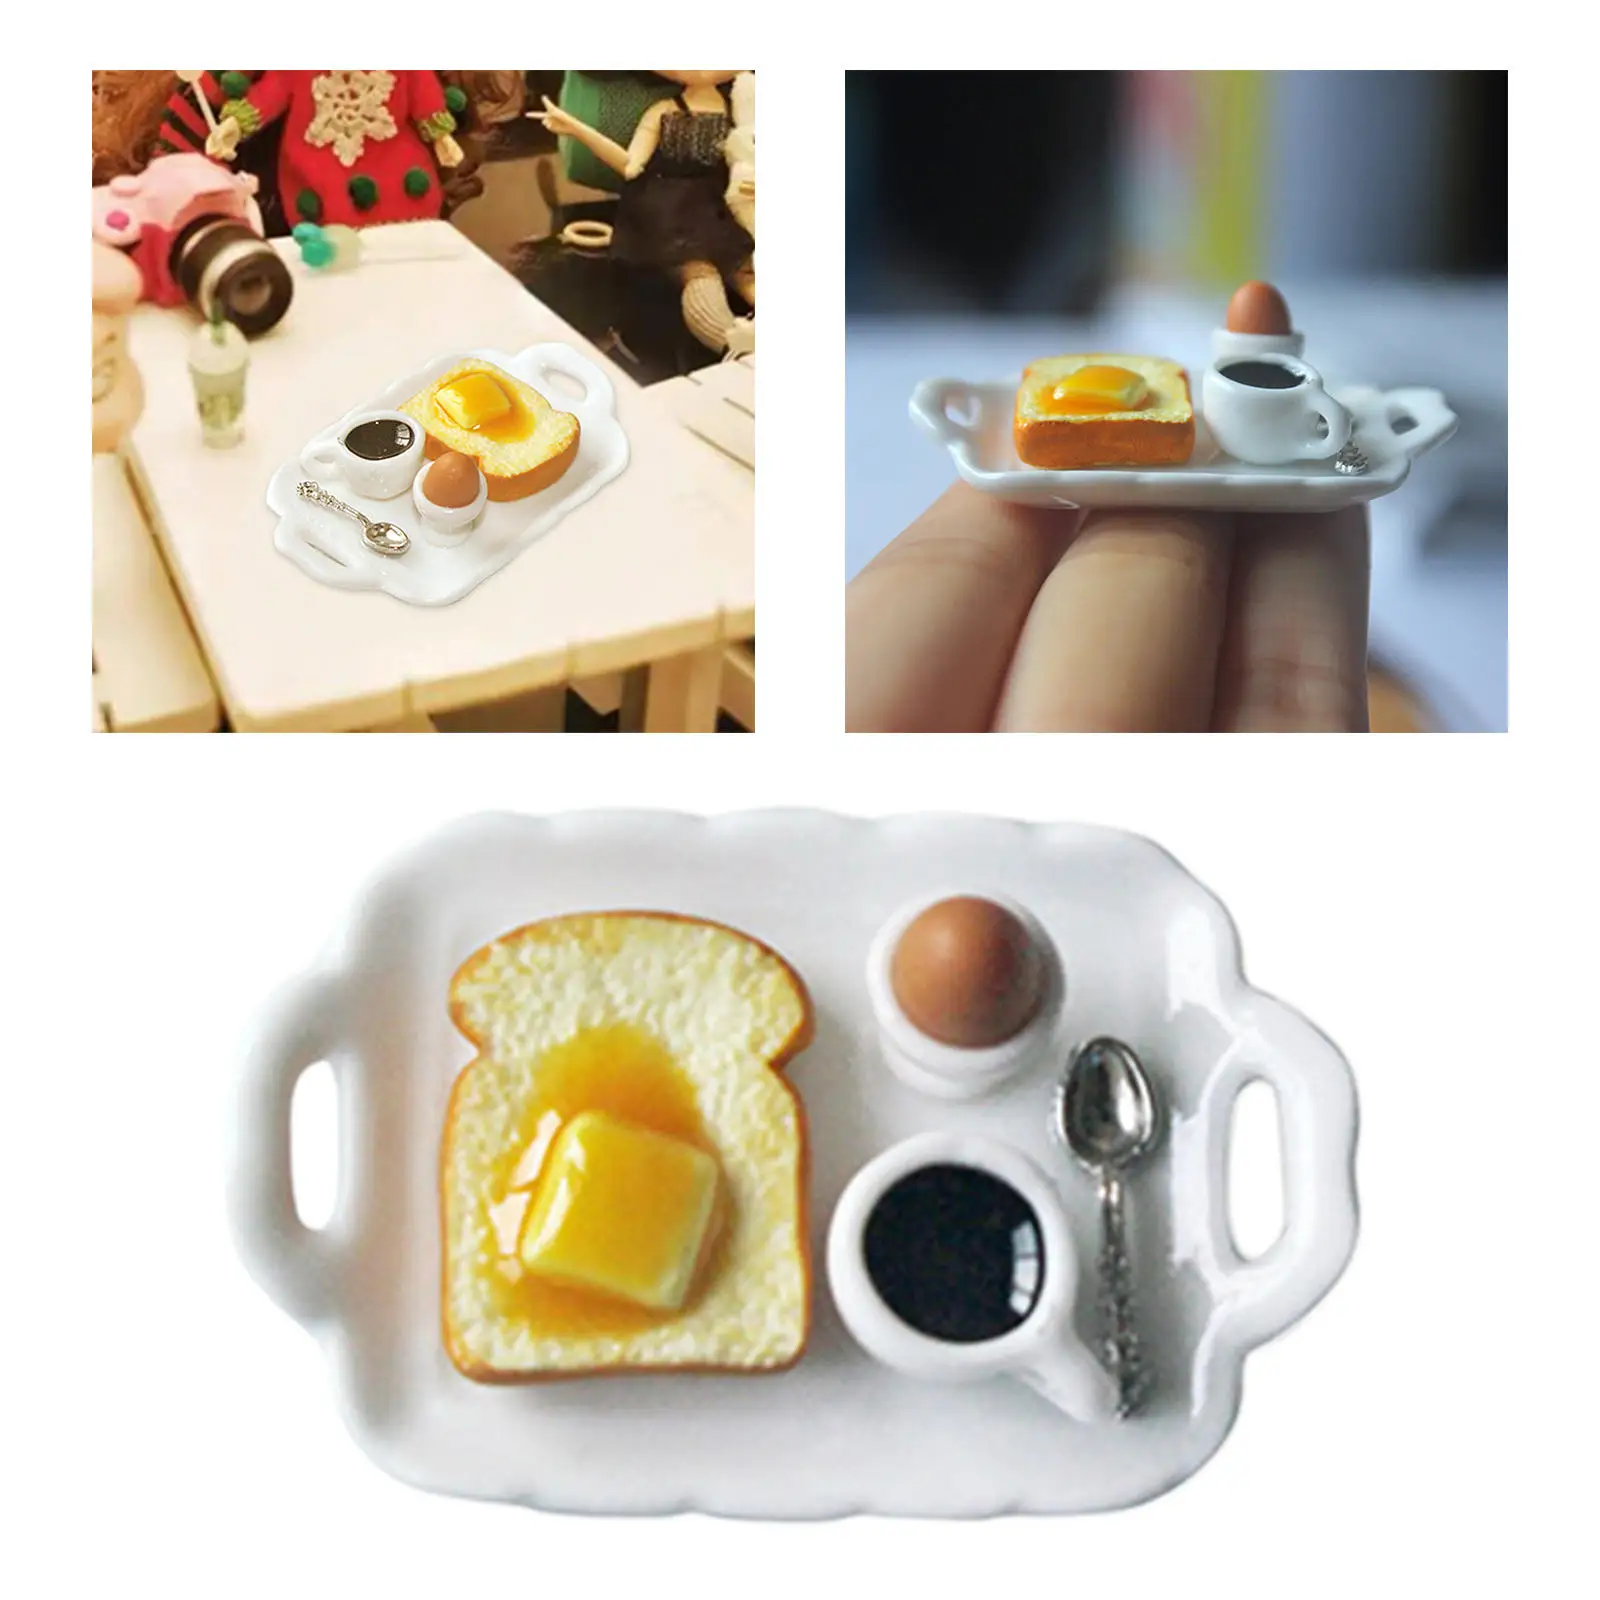 1/12 Scale Doll House Breakfast Plate Doll House Decration Pretend Play Toy for Kids